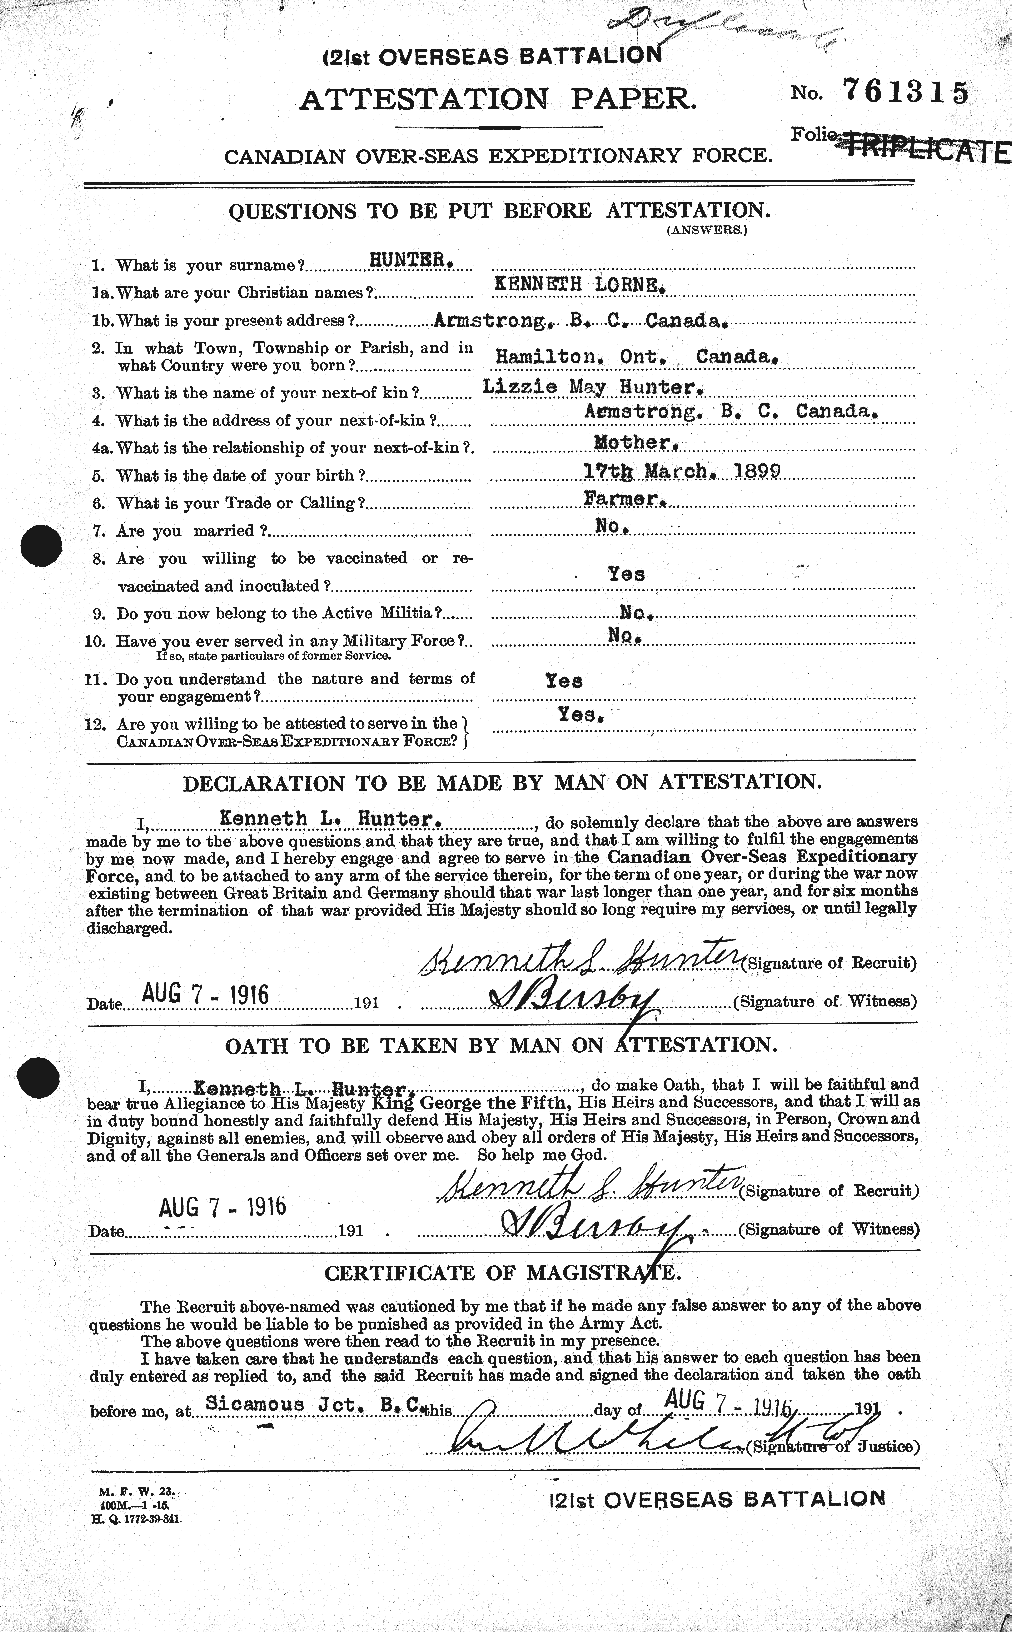 Personnel Records of the First World War - CEF 406397a